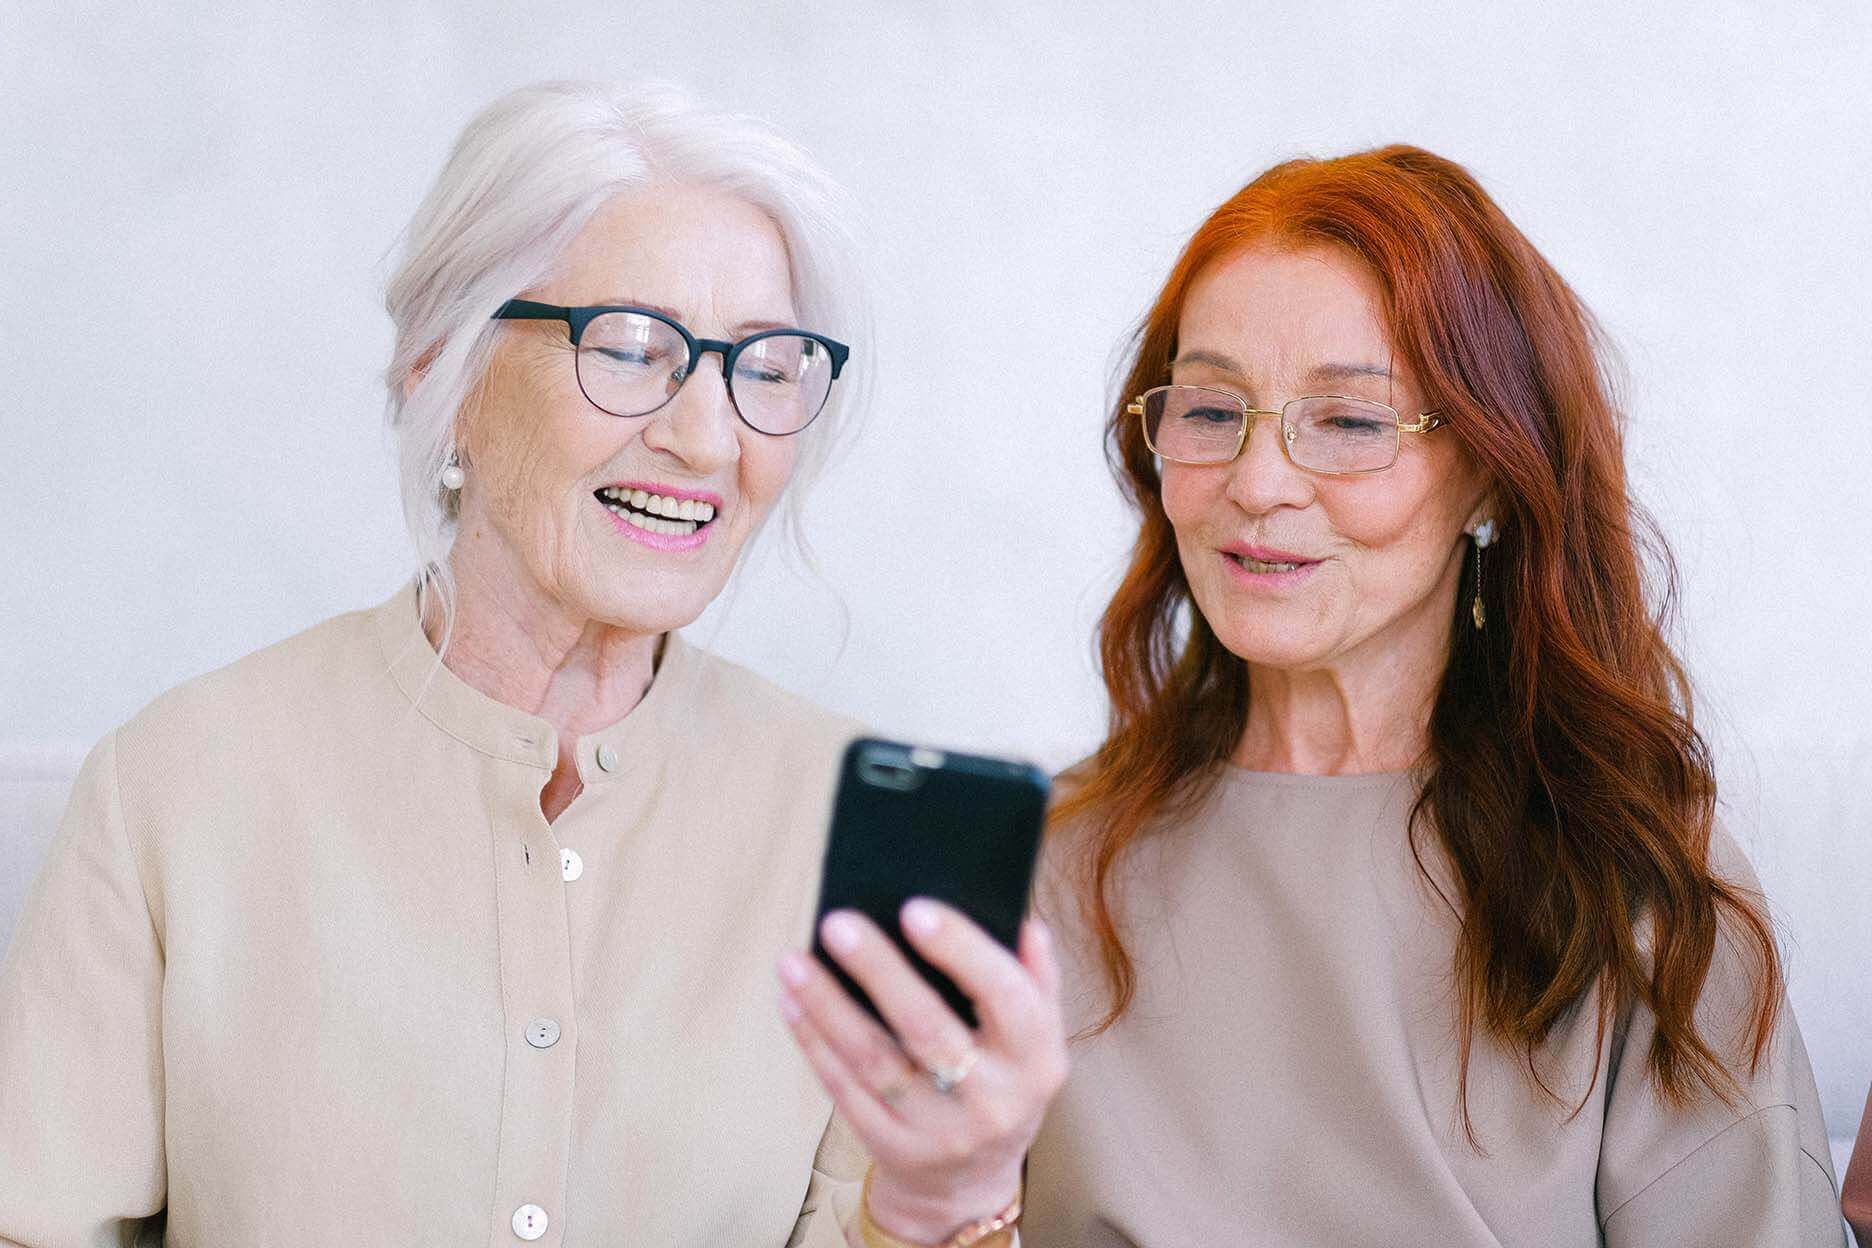 The best apps for seniors - CareAbout